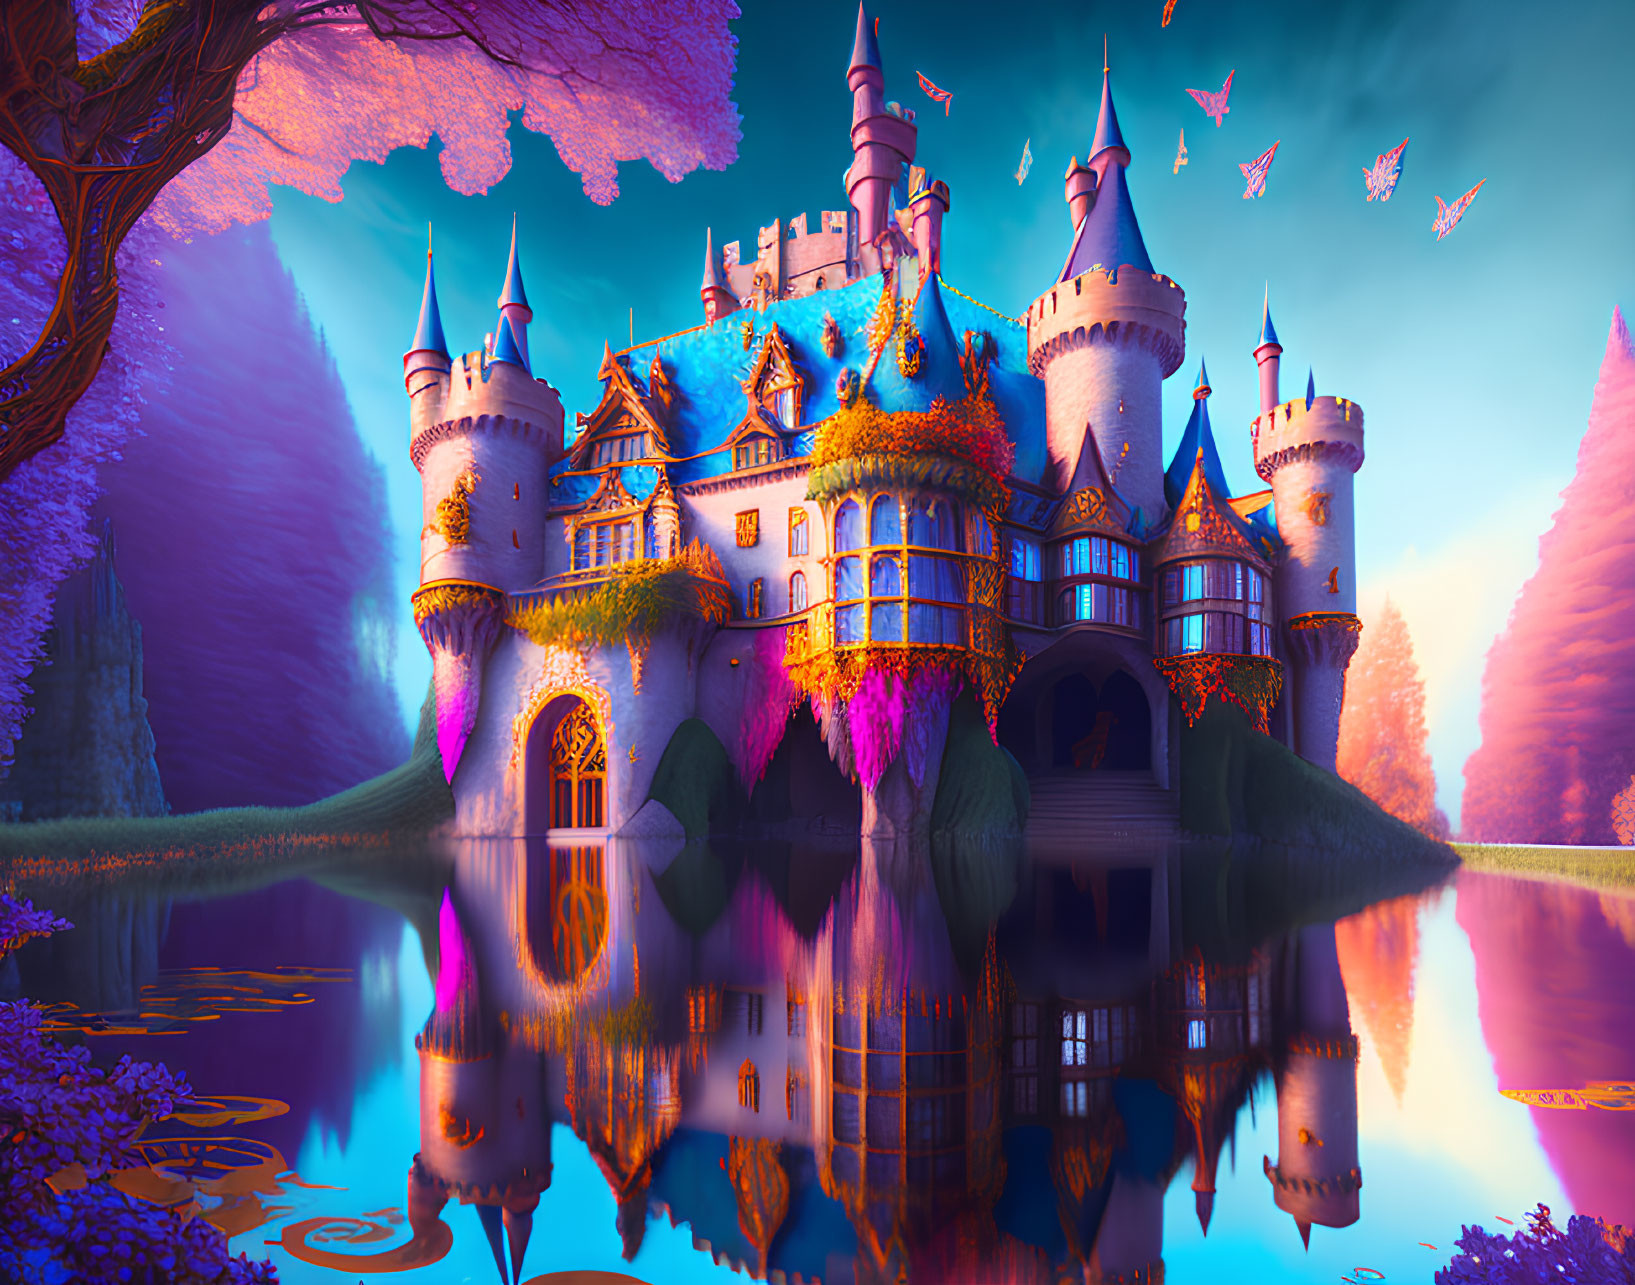 Colorful Flora Surrounds Fantasy Castle by Tranquil Lake